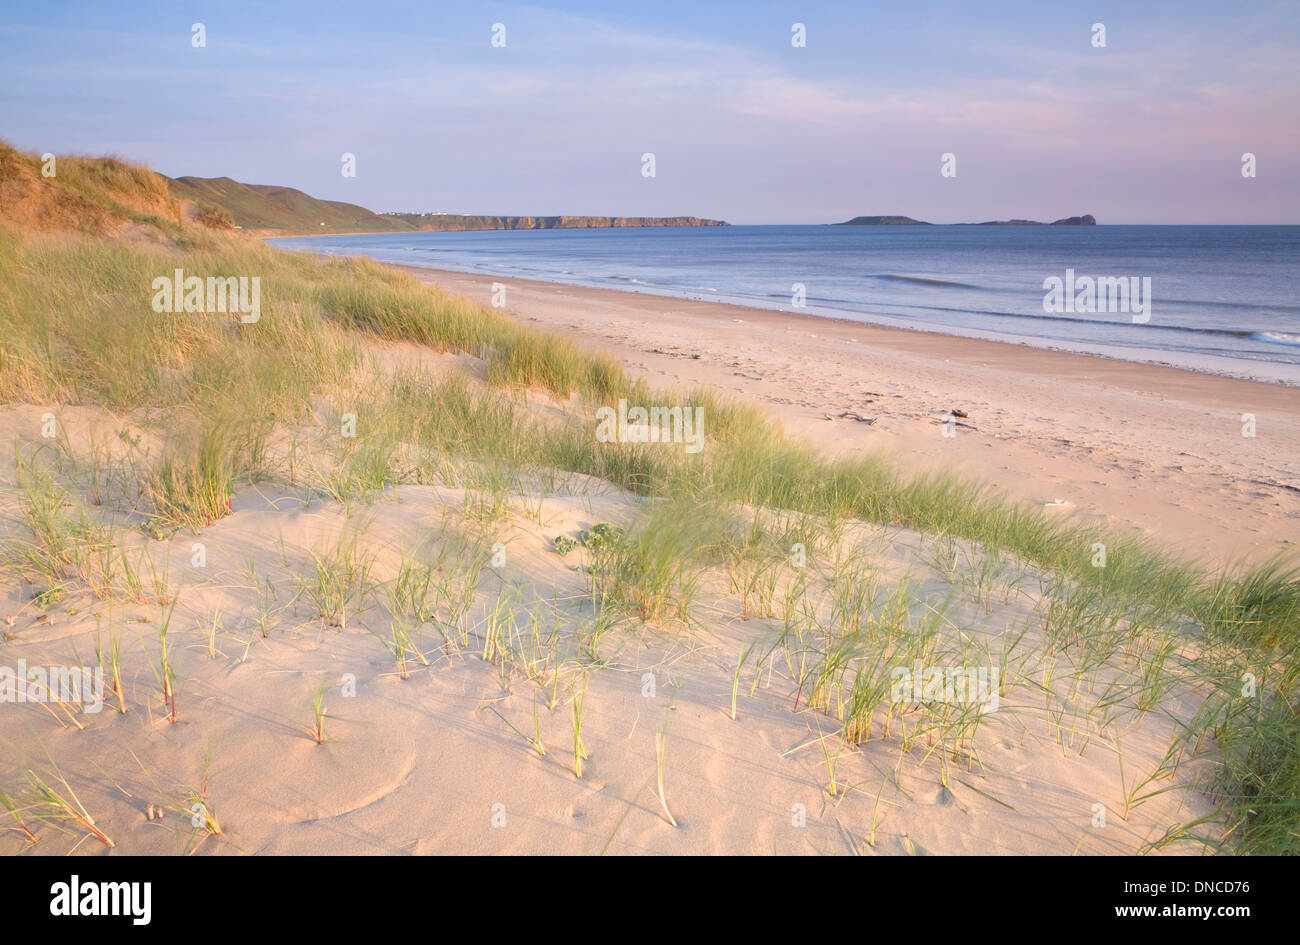 Sand dunes and Marram Grass on the beach at Rhossili Bay at sunset. The Worm's head can be seen in the distance. Stock Photo